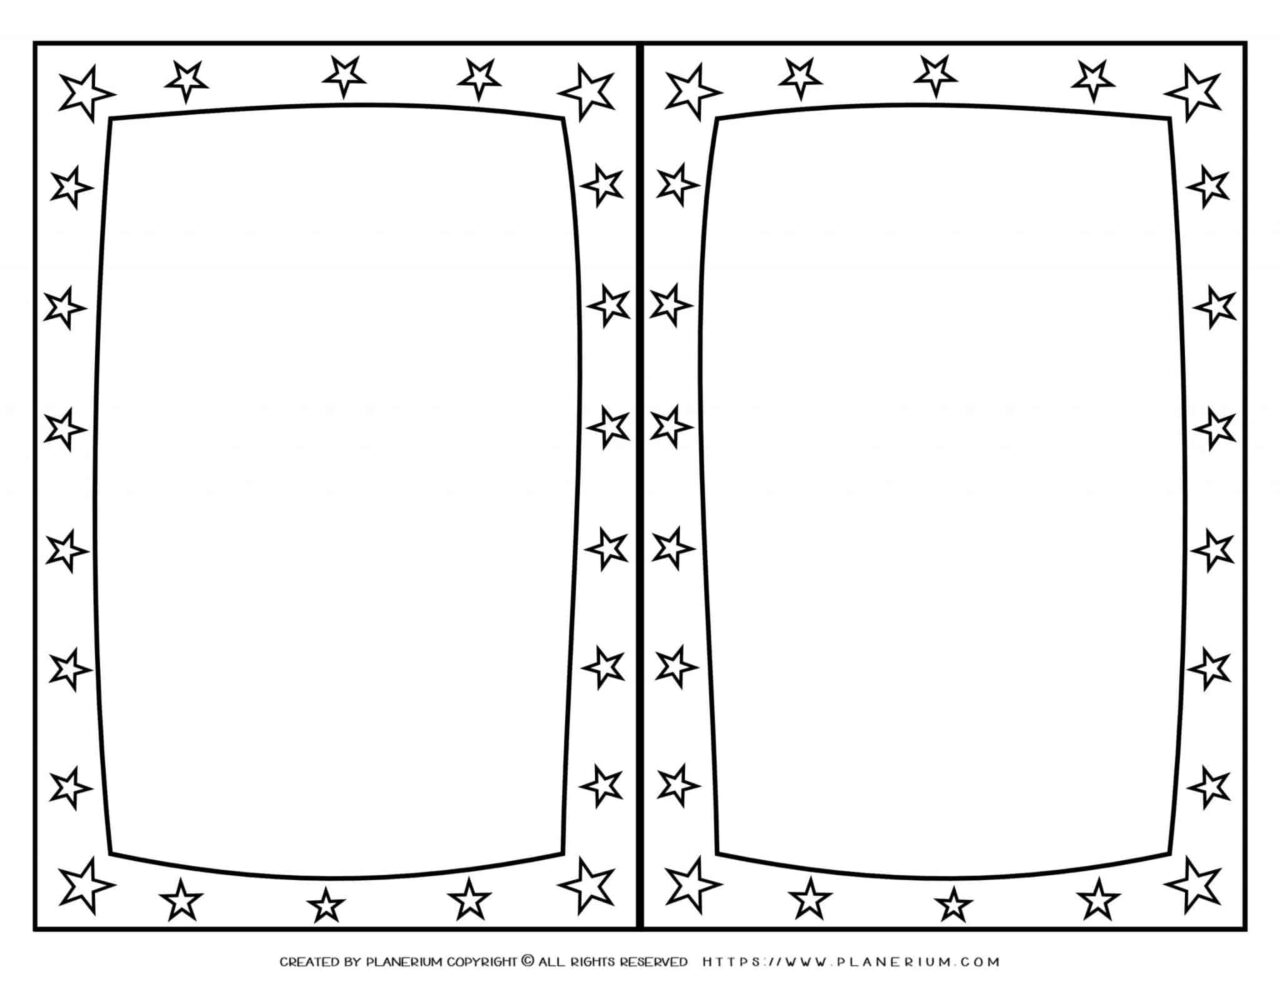 Mother's Day Coloring Page - Greeting Frame with Stars